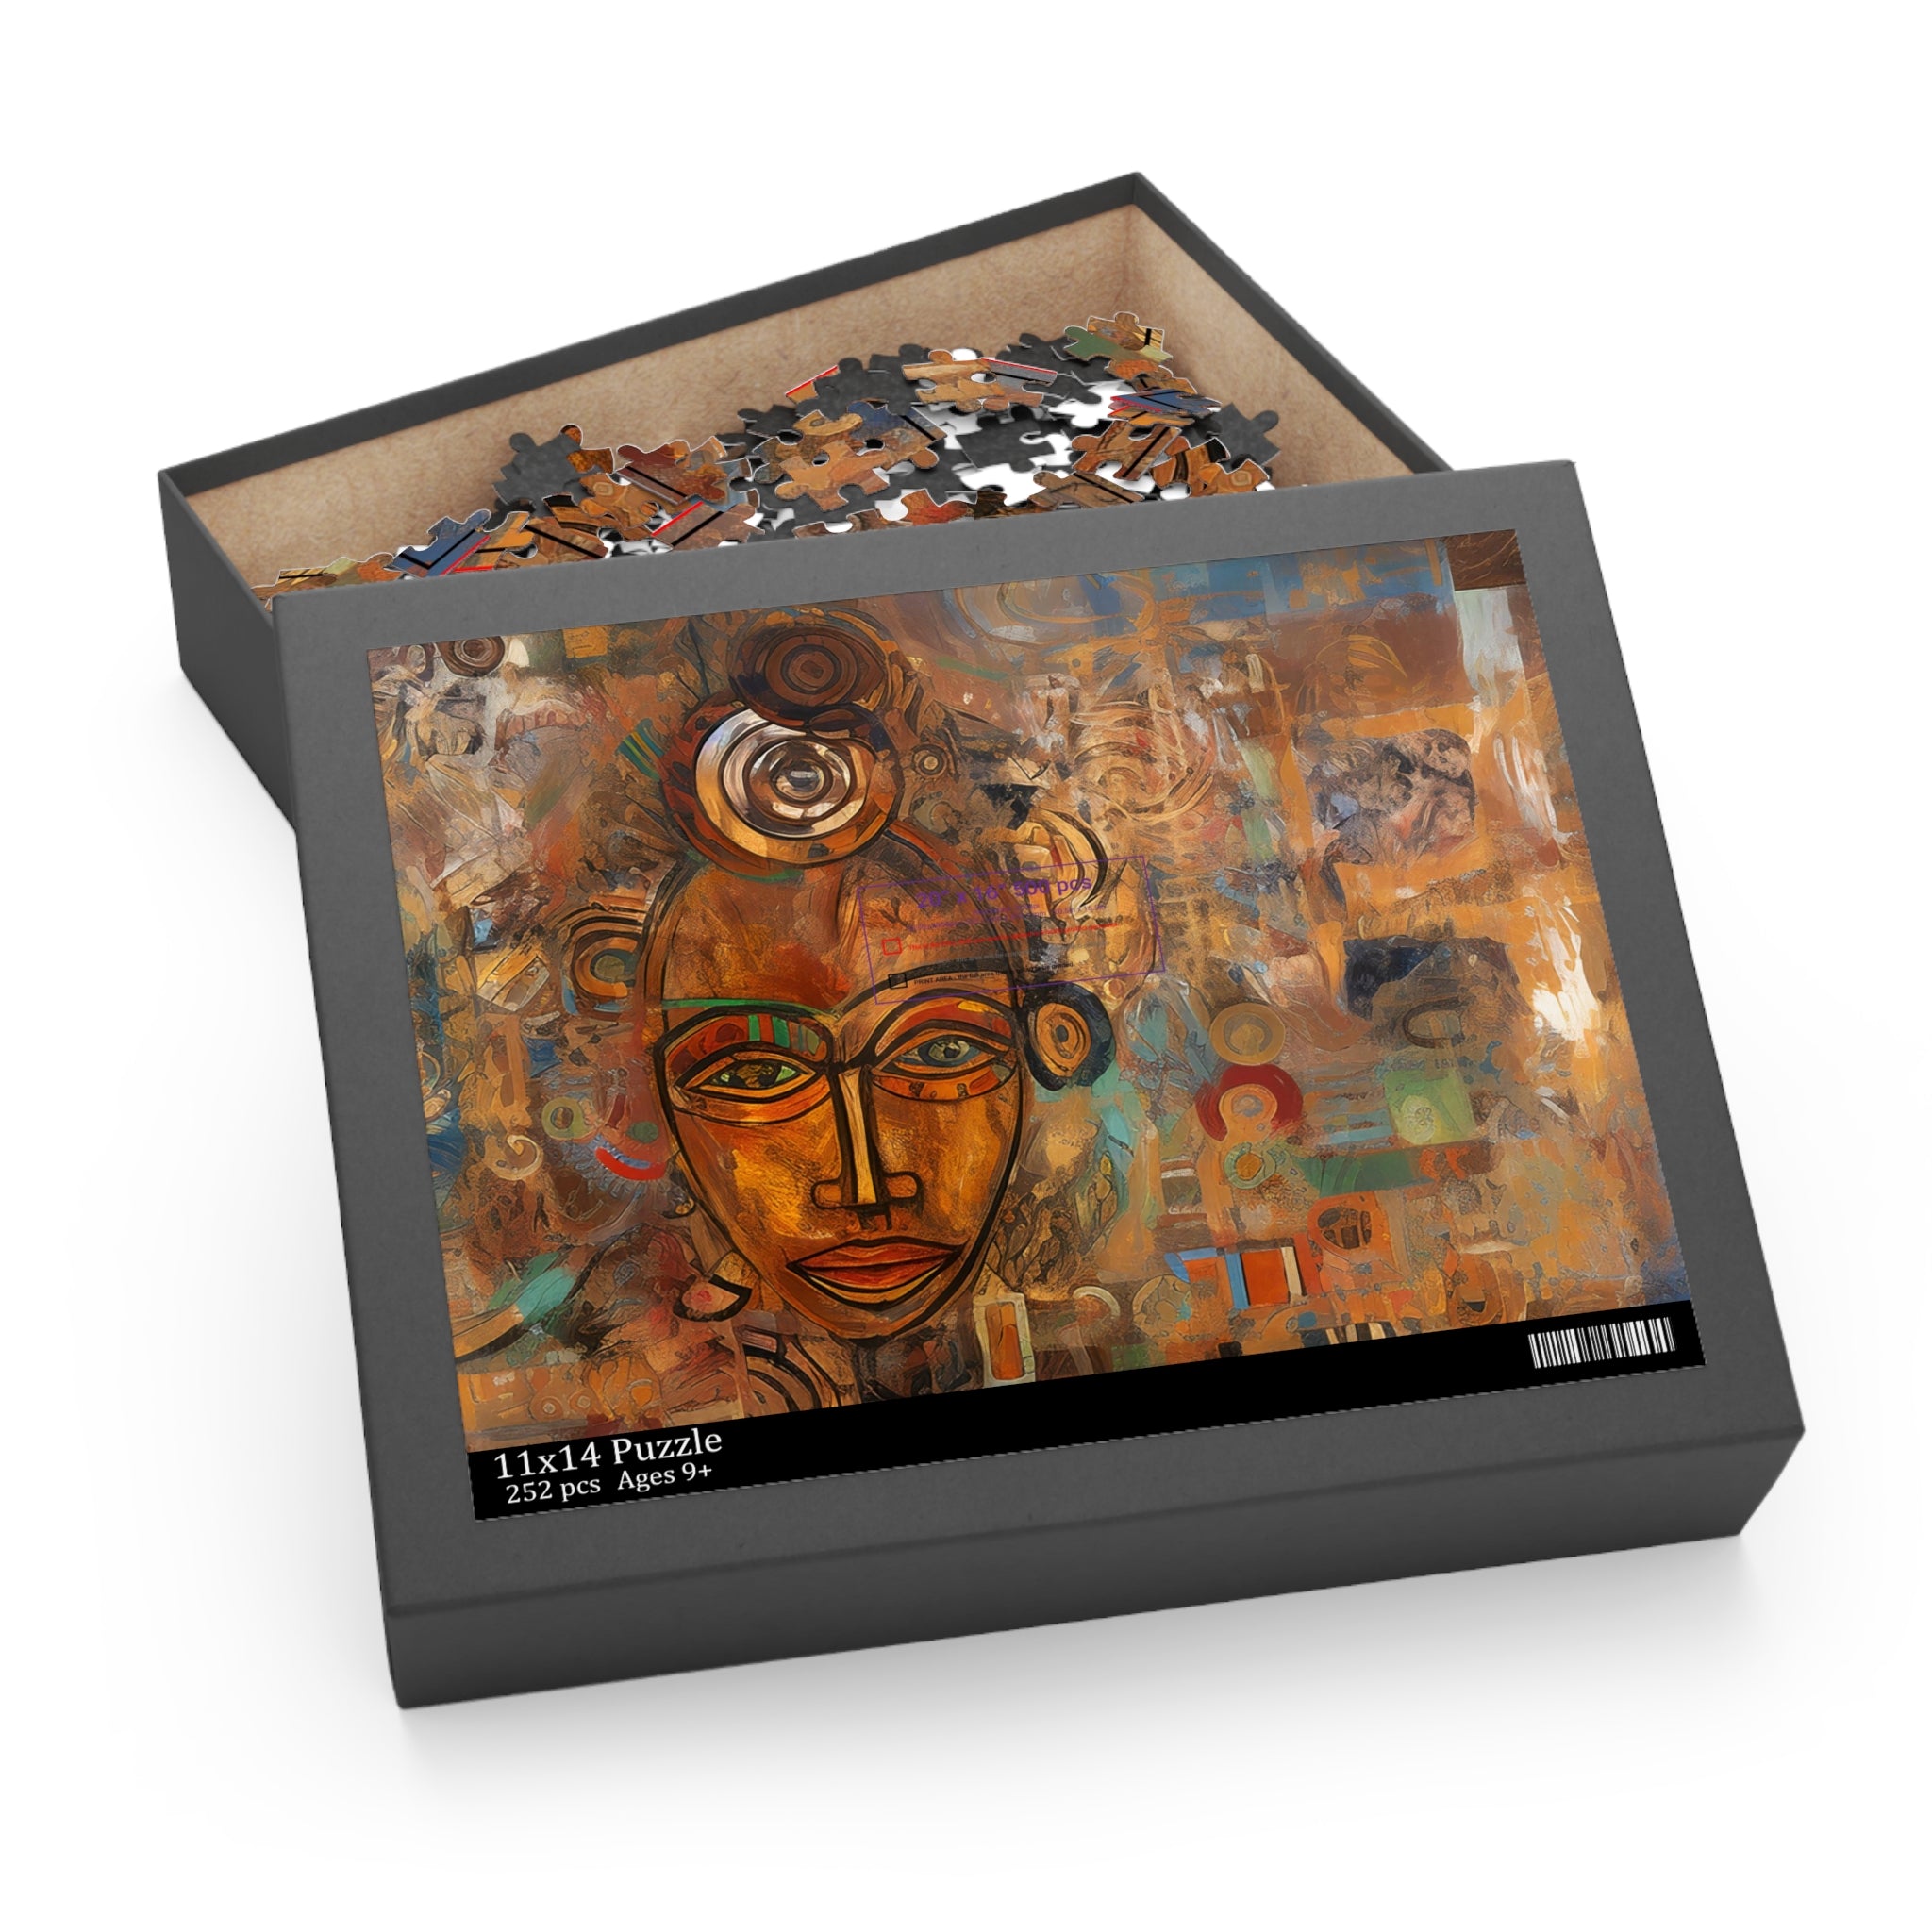 Box cover view of 11x14 African Abstract Art Puzzle.